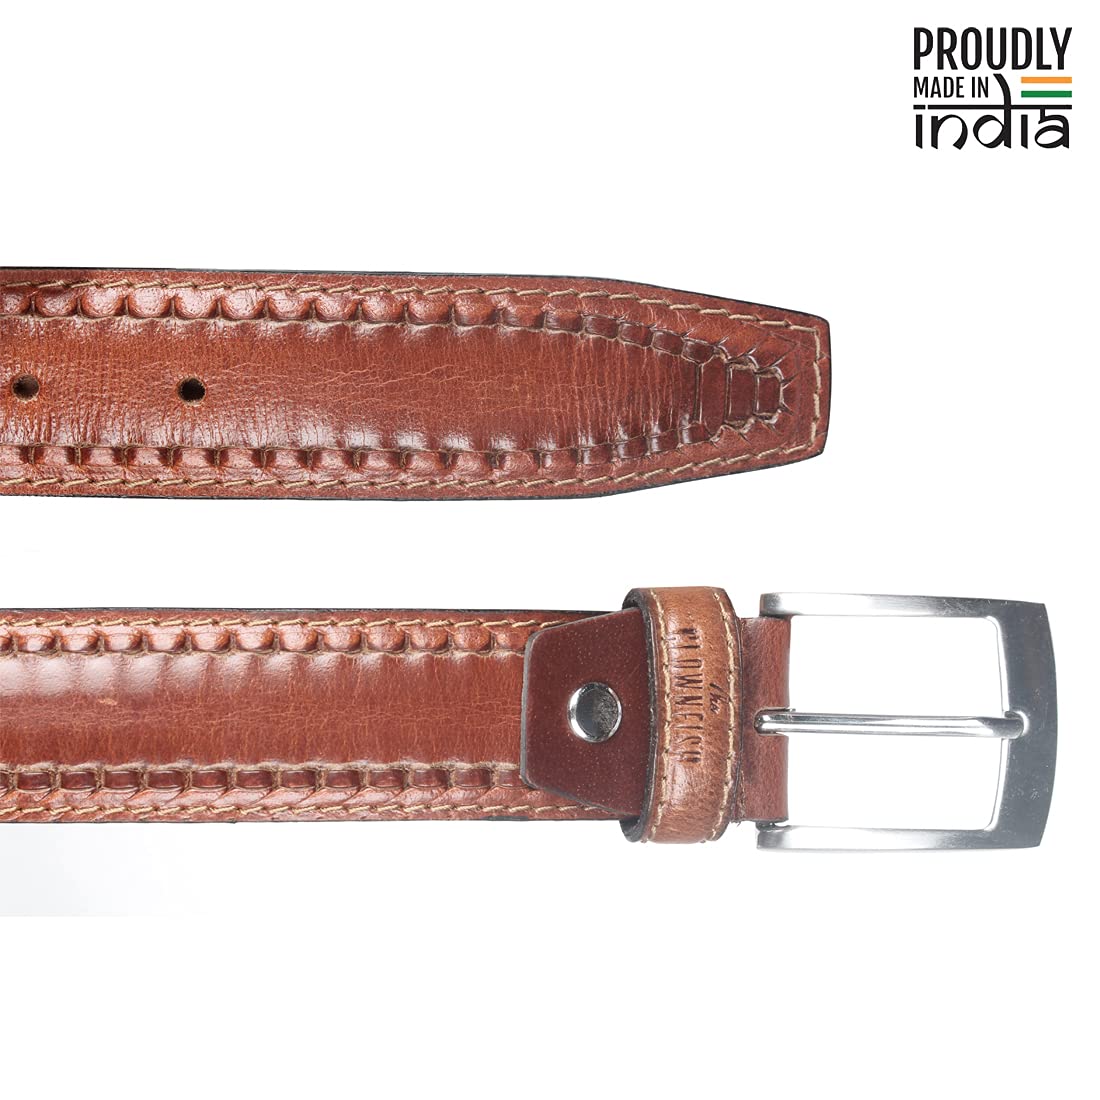 THE CLOWNFISH Men's Genuine Leather Belt with Embossed Design - Cinnamon Brown (Size - 32 inches)